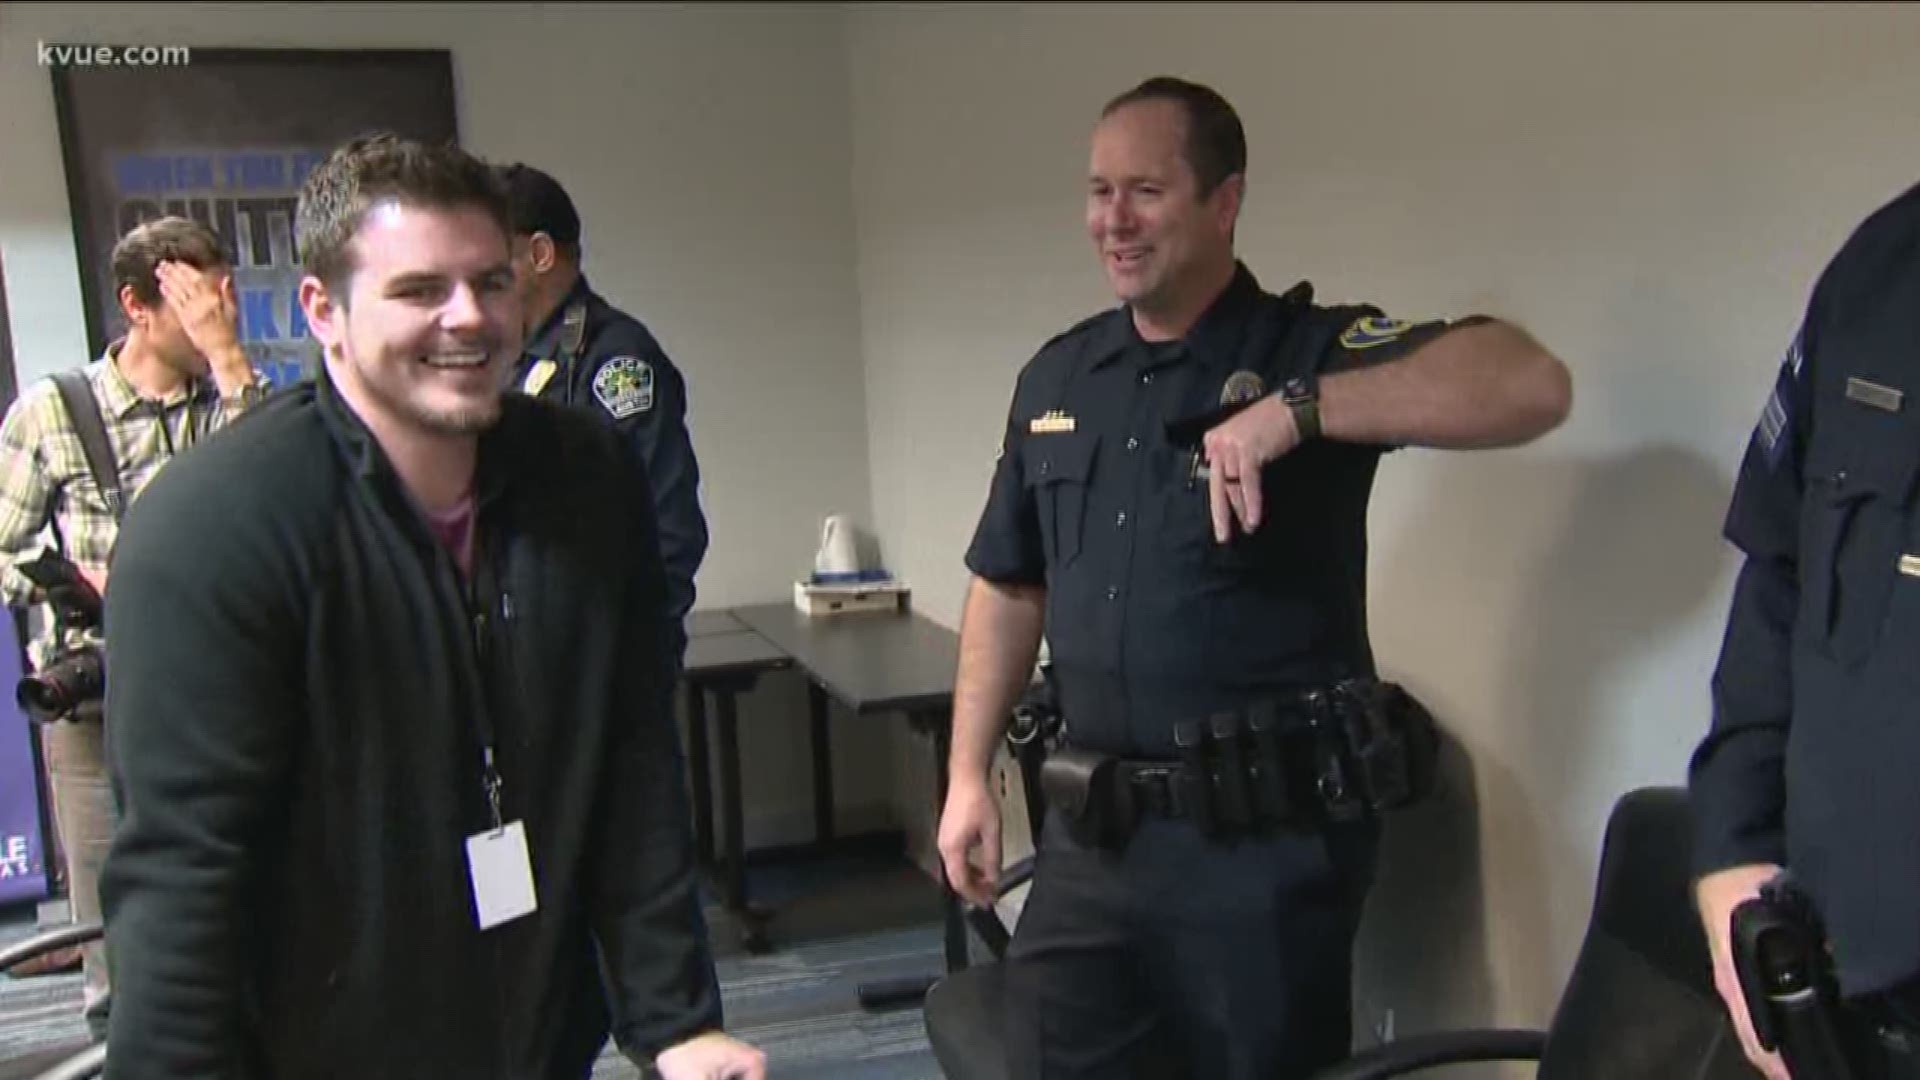 A rare reunion today between a man and one of the officers who saved his life. A Pflugerville Police Department sergeant was off duty when he saw the accident in January.